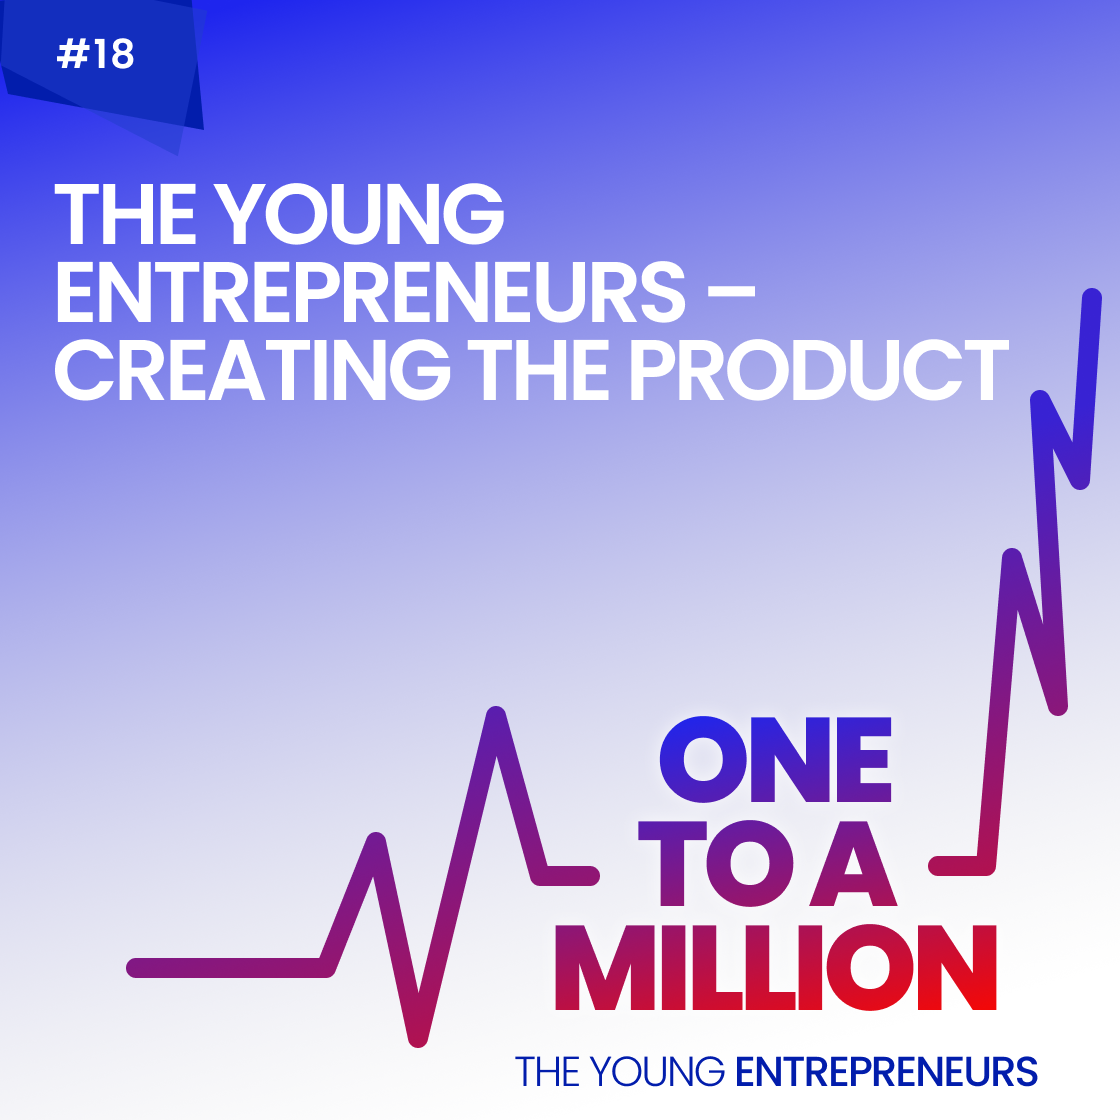 The Young Entrepreneurs One To A Million Project Creating the Product